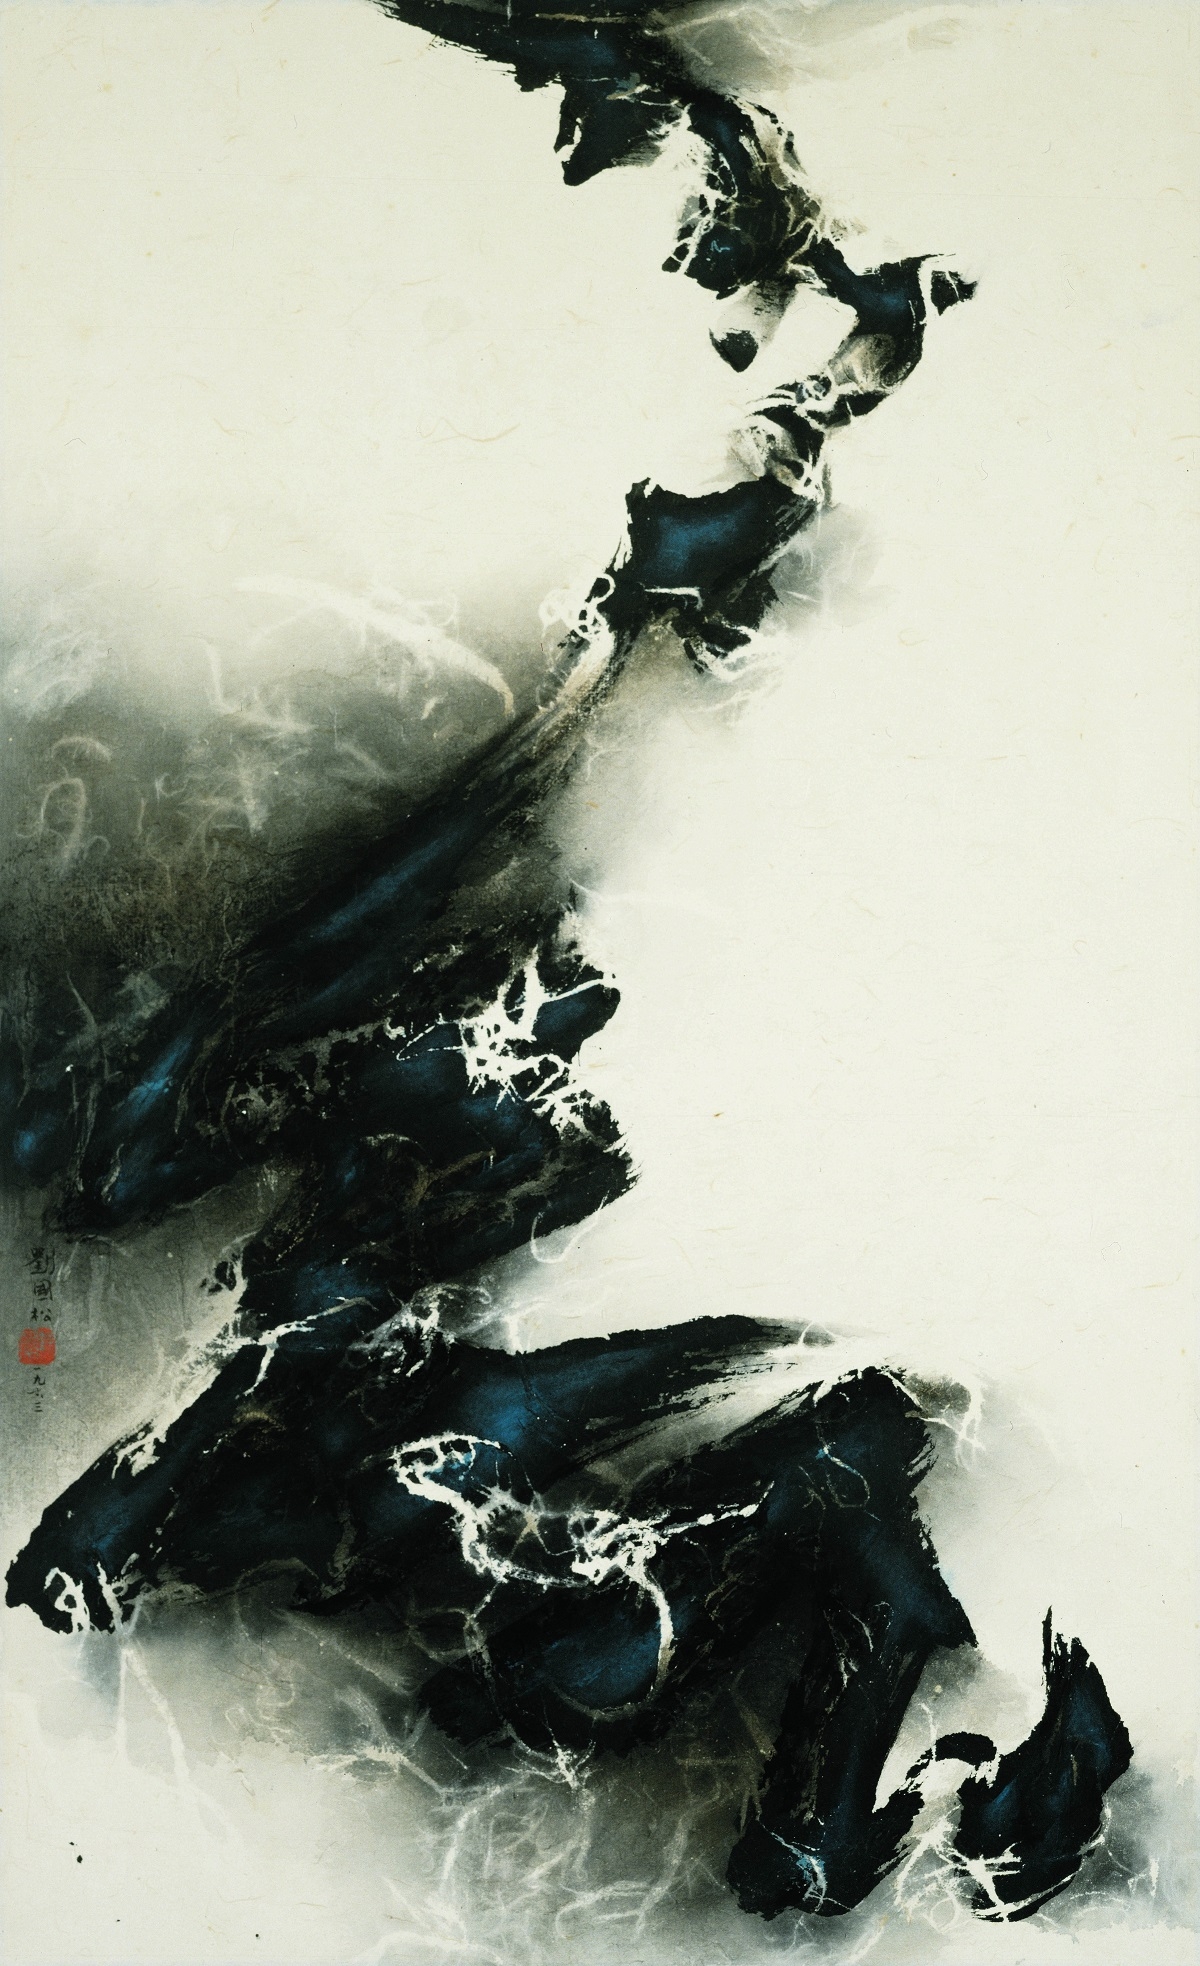 Liu Kuo-sung (b. 1932), Rising Toward Mysterious Whiteness, 1963, Ink and color on paper, H. 94 x W. 58 cm, Courtesy of The Ink Society